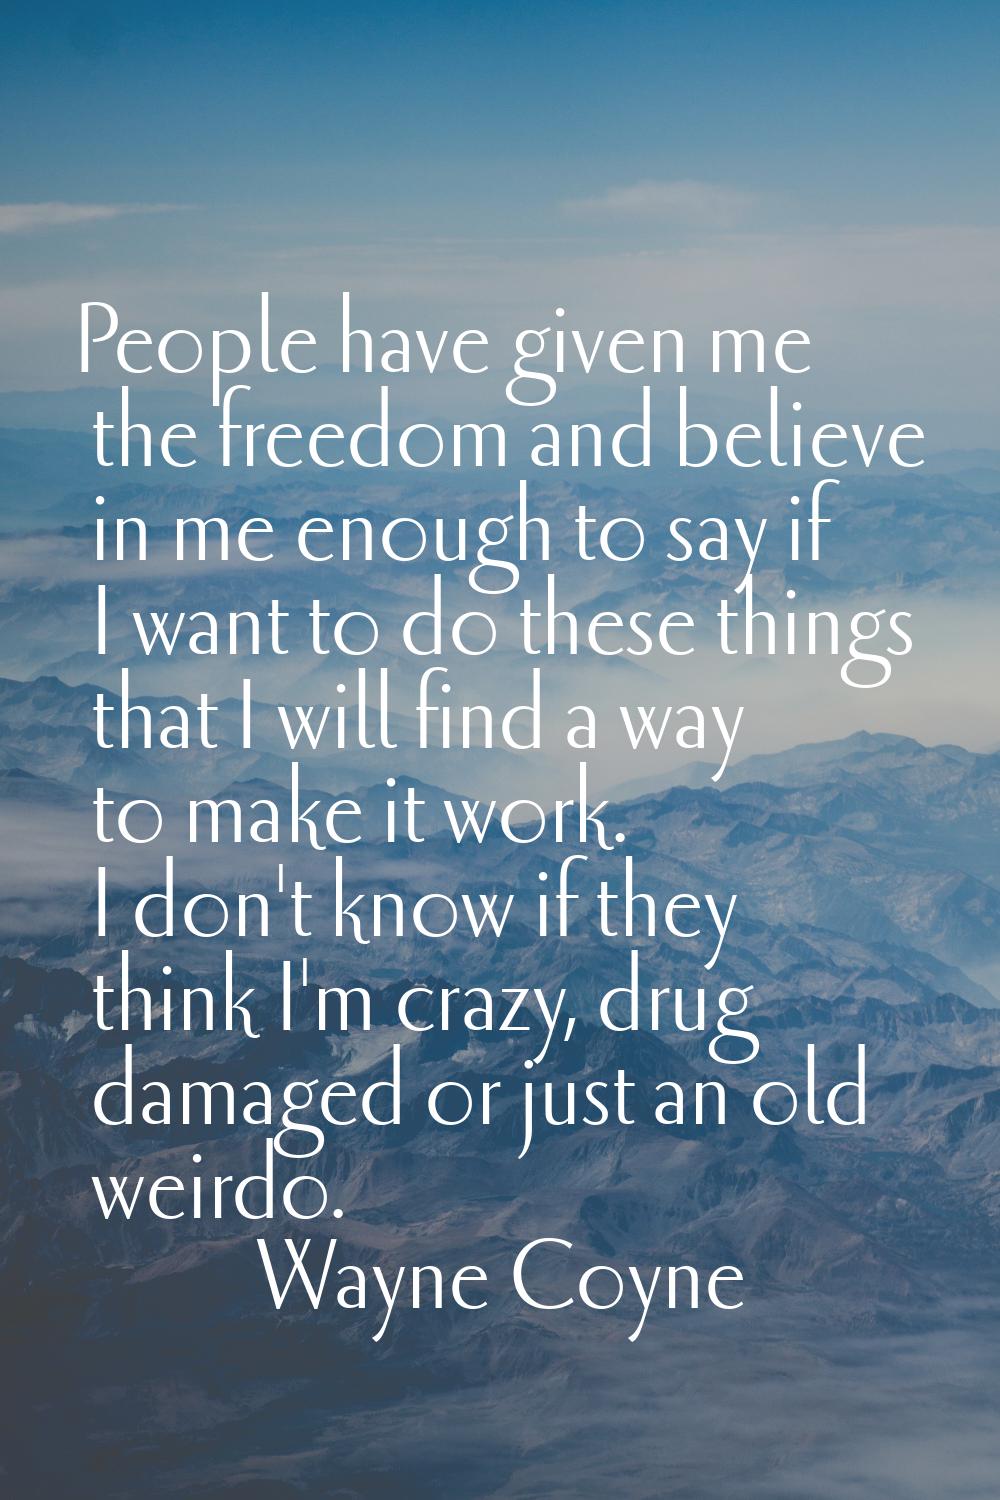 People have given me the freedom and believe in me enough to say if I want to do these things that 